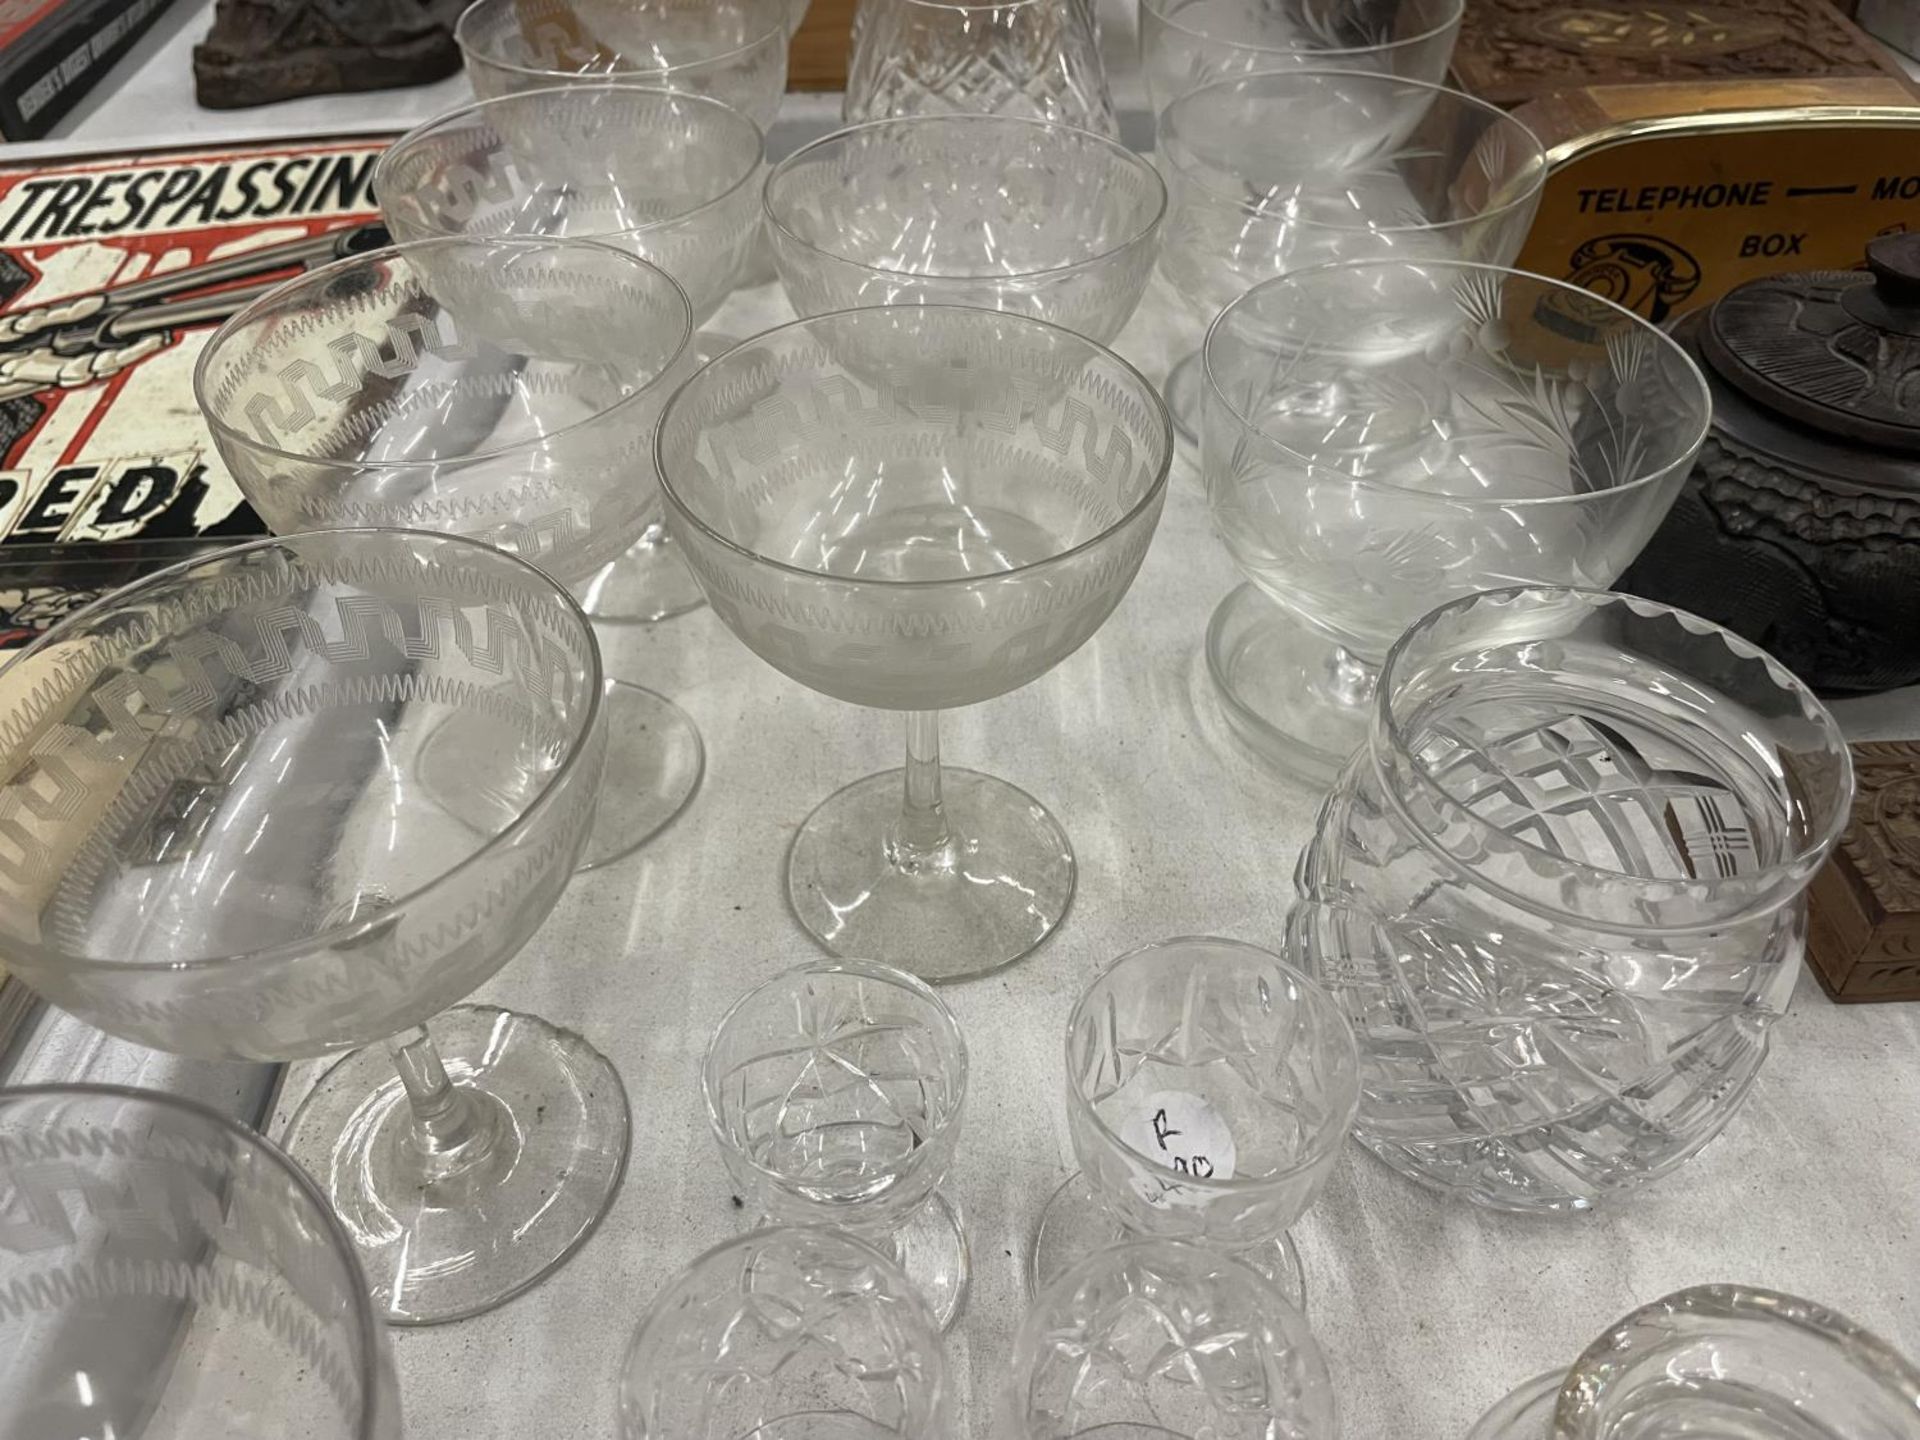 A QUANTITY OF GLASSWARE TO INCLUDE BRANDY GLASSES, CHAMPAGNE GLASSES, SHERRY GLASSES ETC., - Image 3 of 4